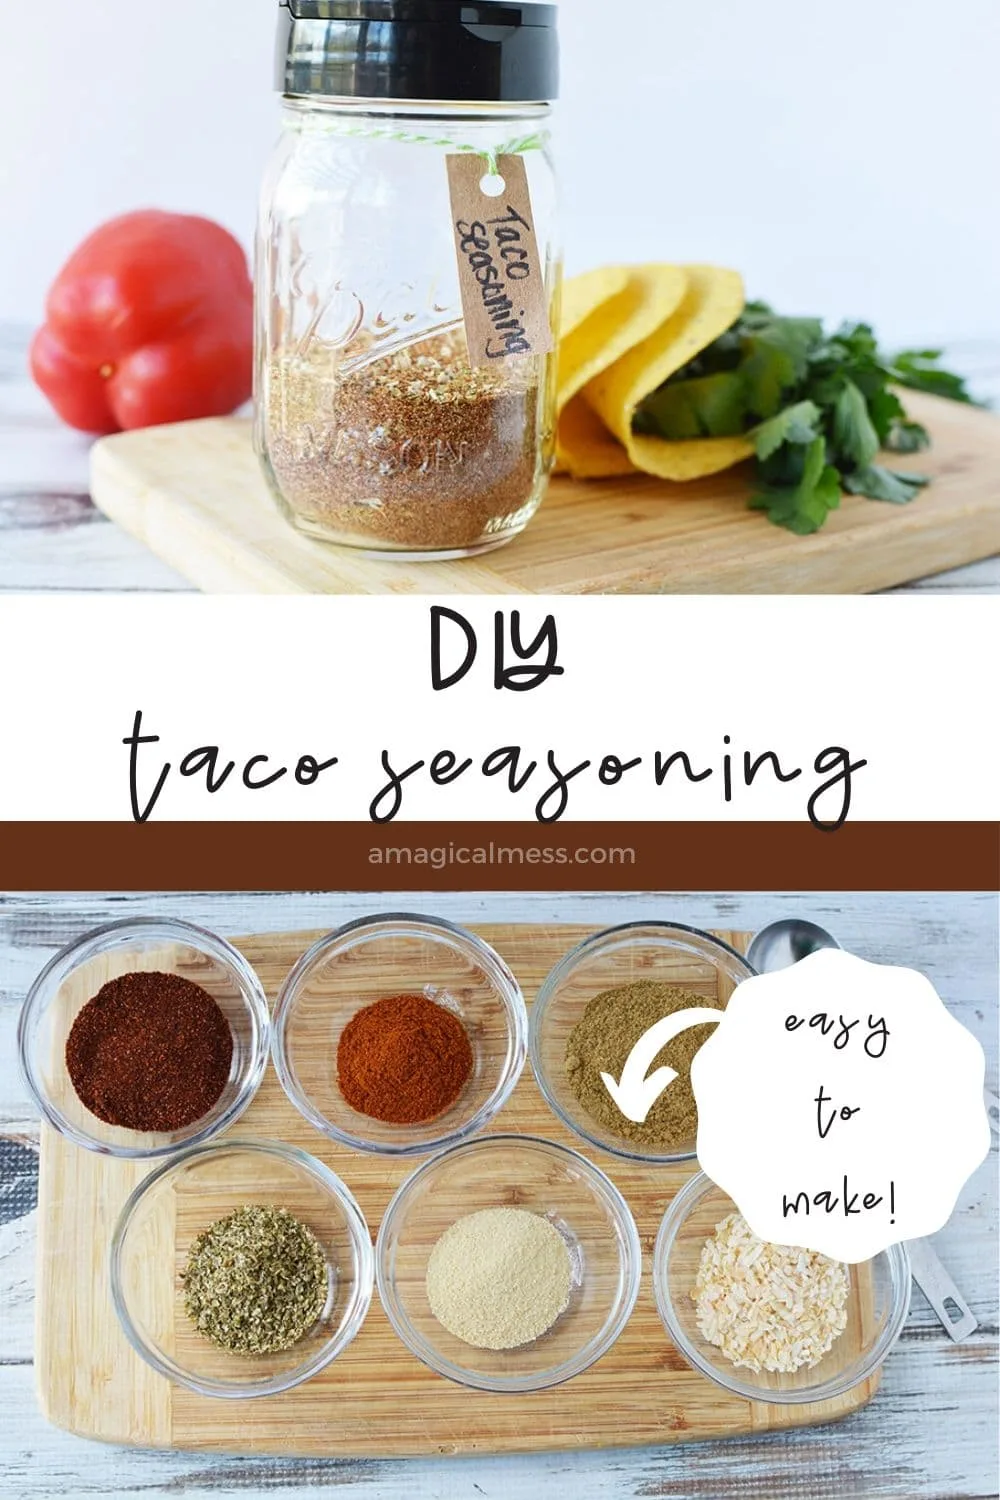 Taco seasoning in a jar and spices in little bowls.